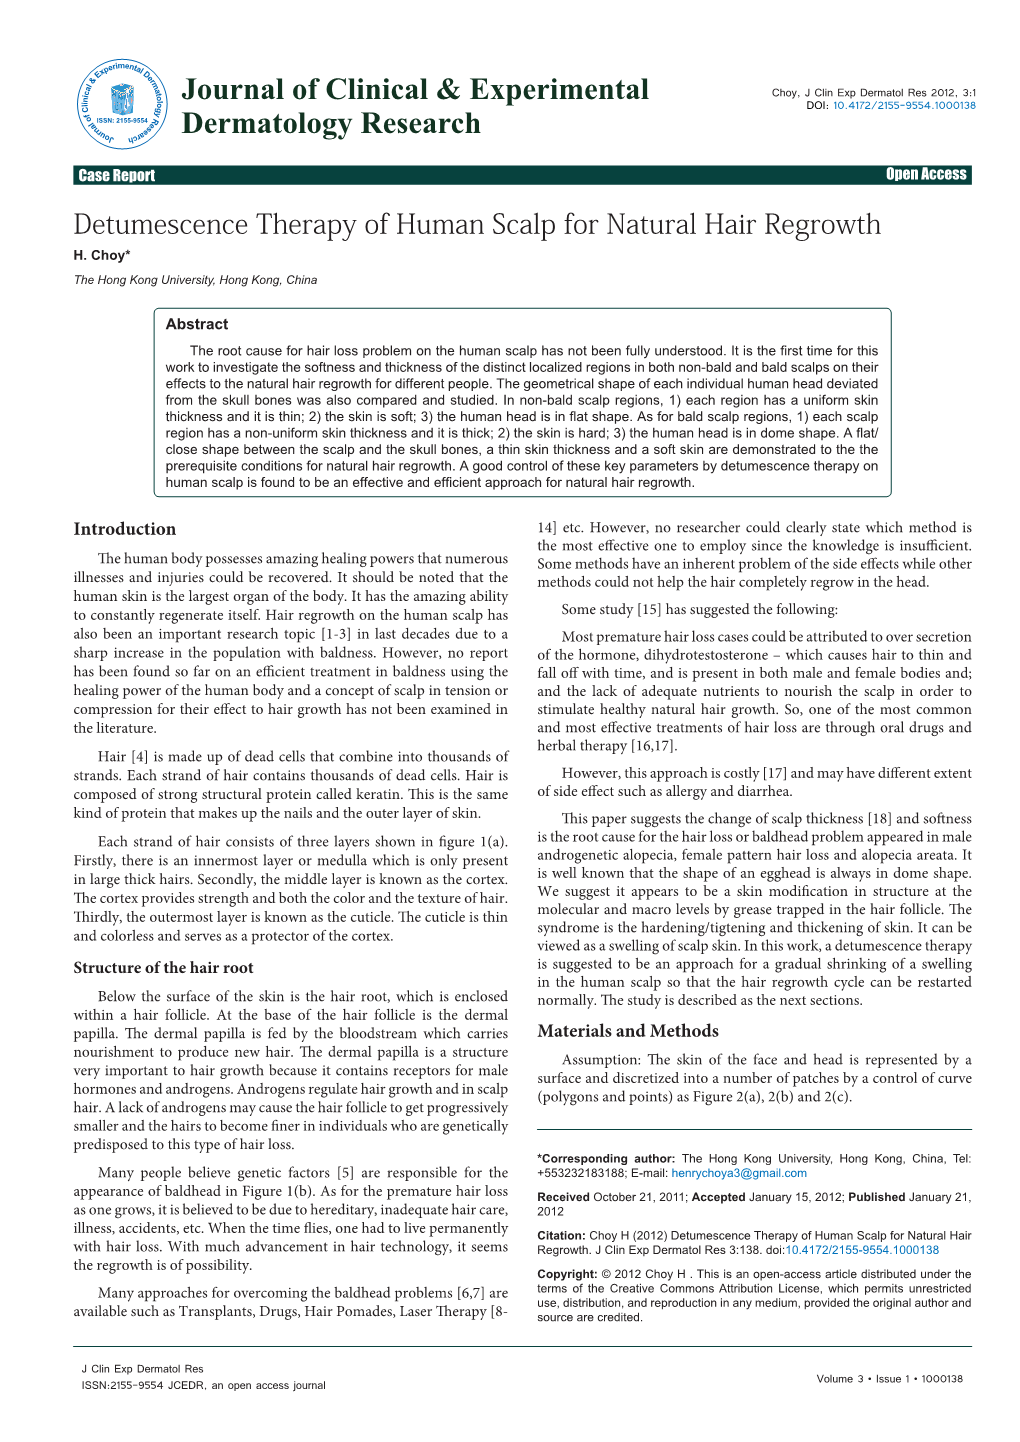 Detumescence Therapy of Human Scalp for Natural Hair Regrowth H